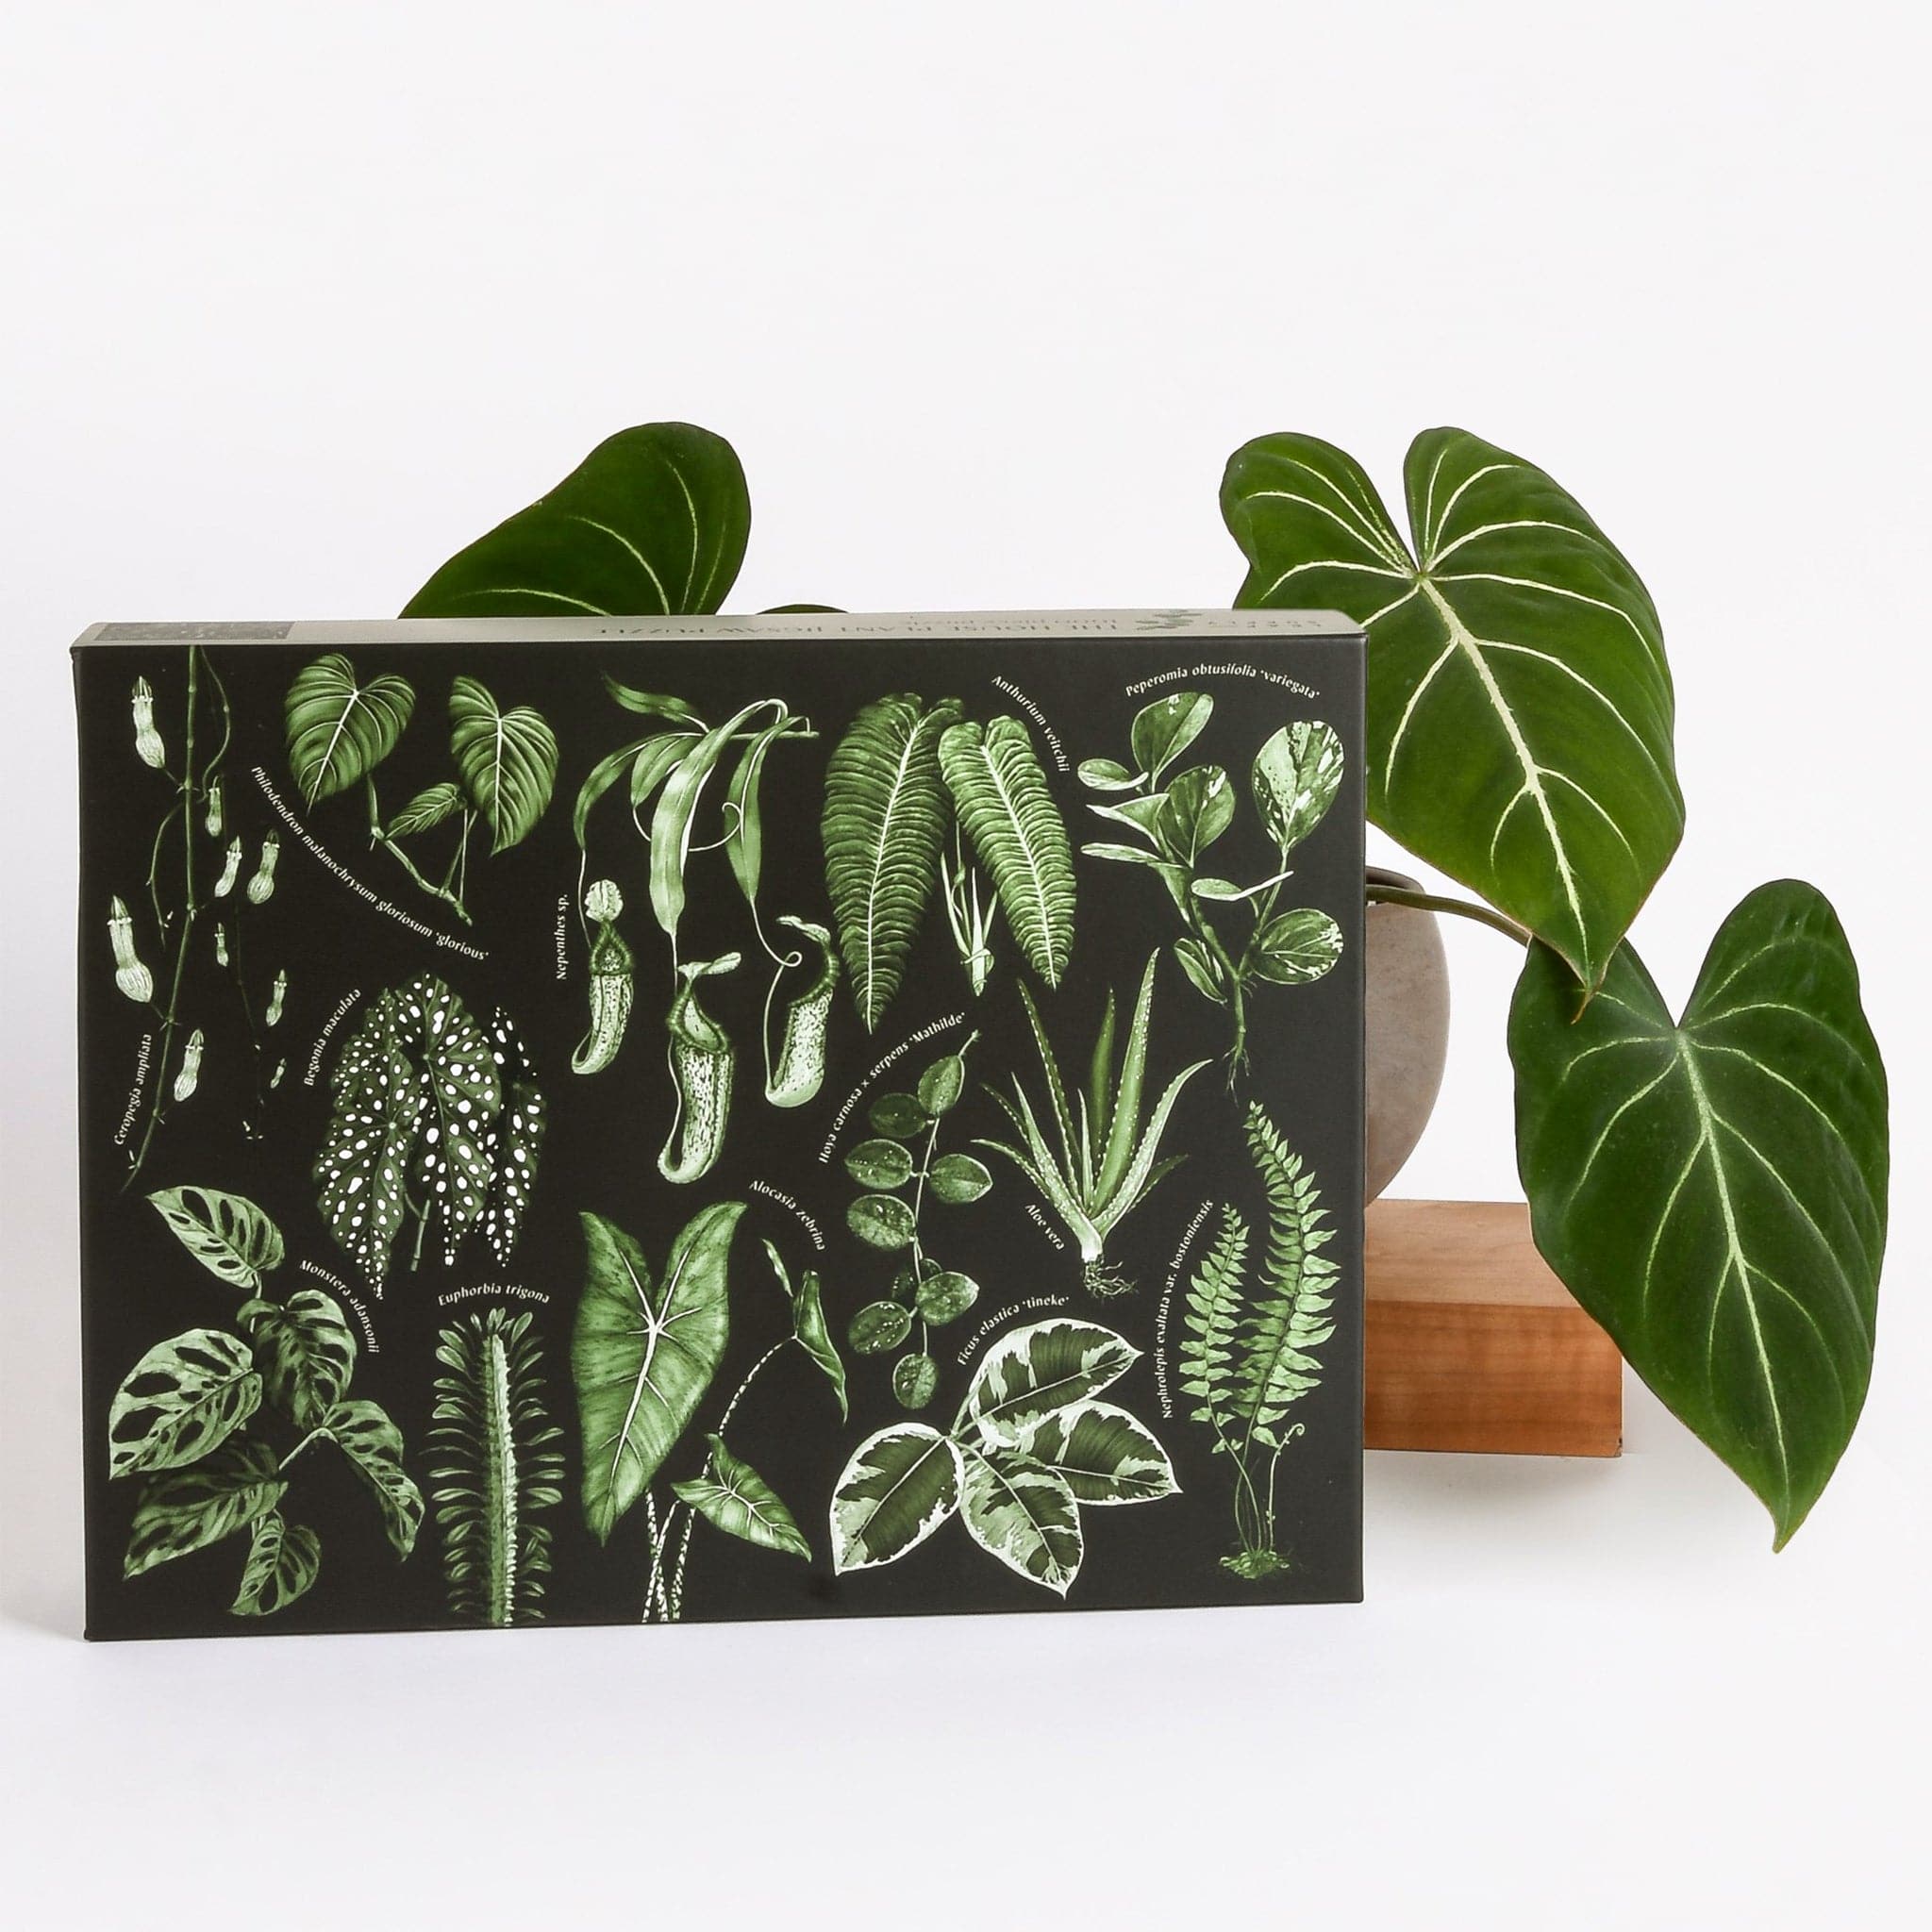 On a white background is a black puzzle box with an assortment of green house plant leaf illustrations on the front cover photographed alongside a green leafy house plant. 